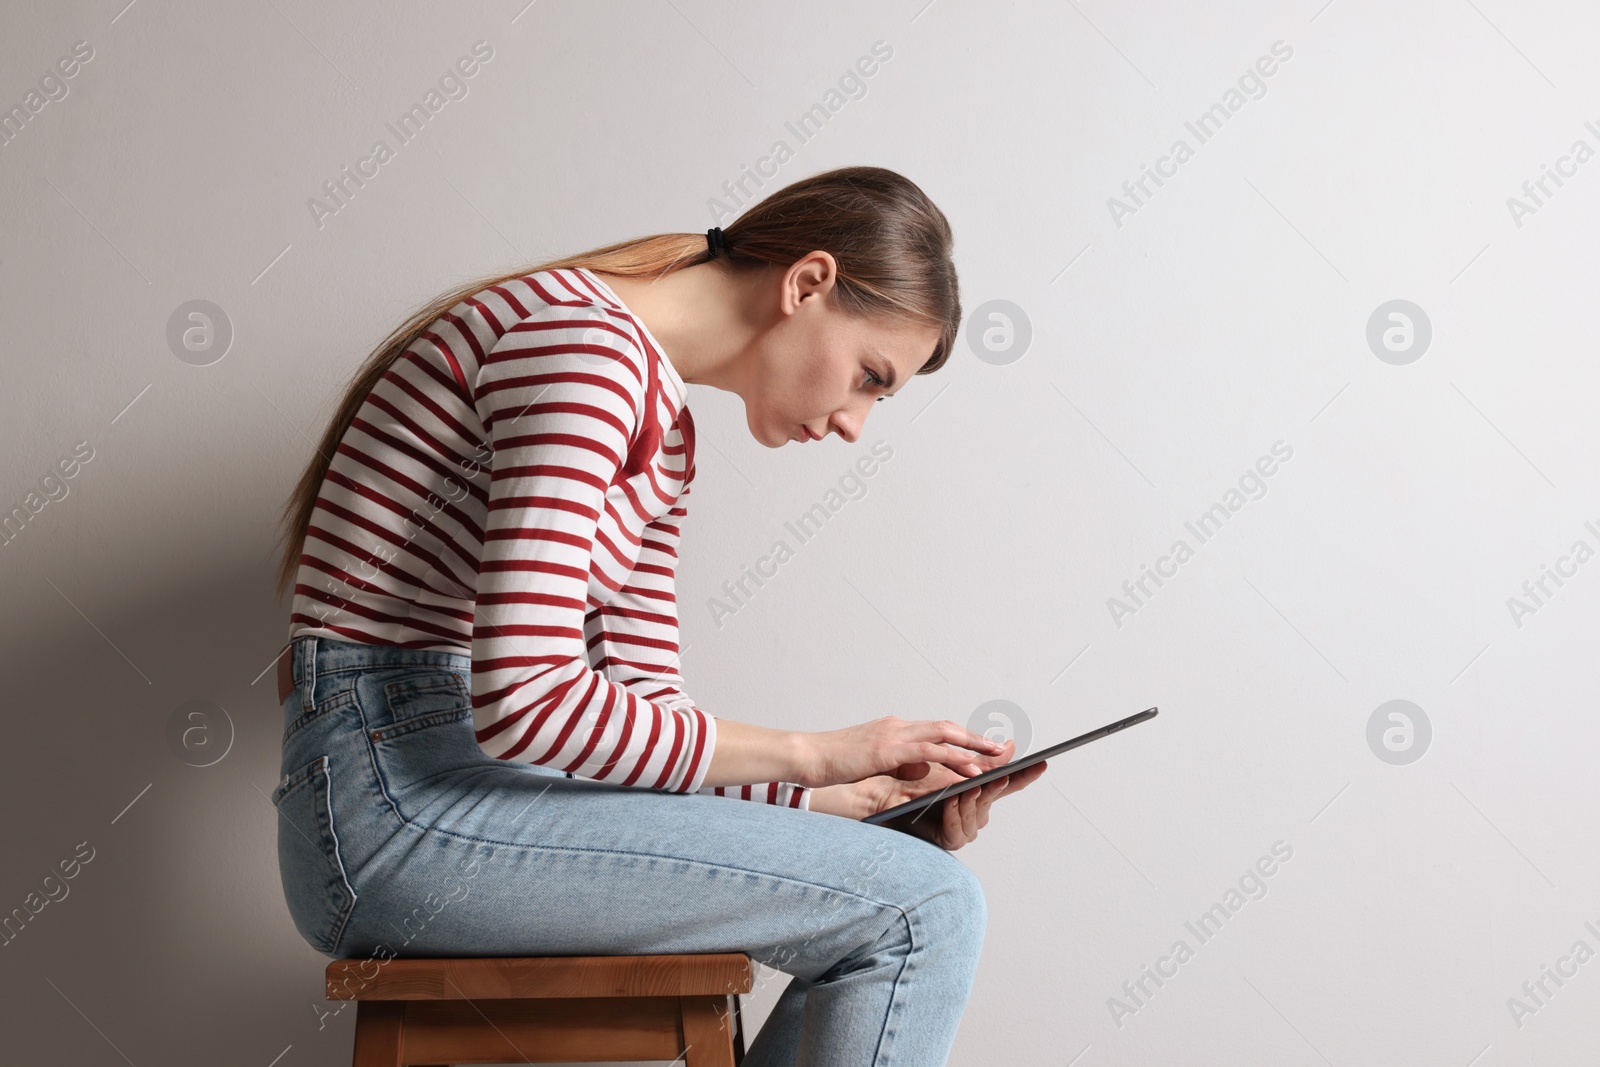 Photo of Woman with bad posture using tablet while sitting on stool against light grey background